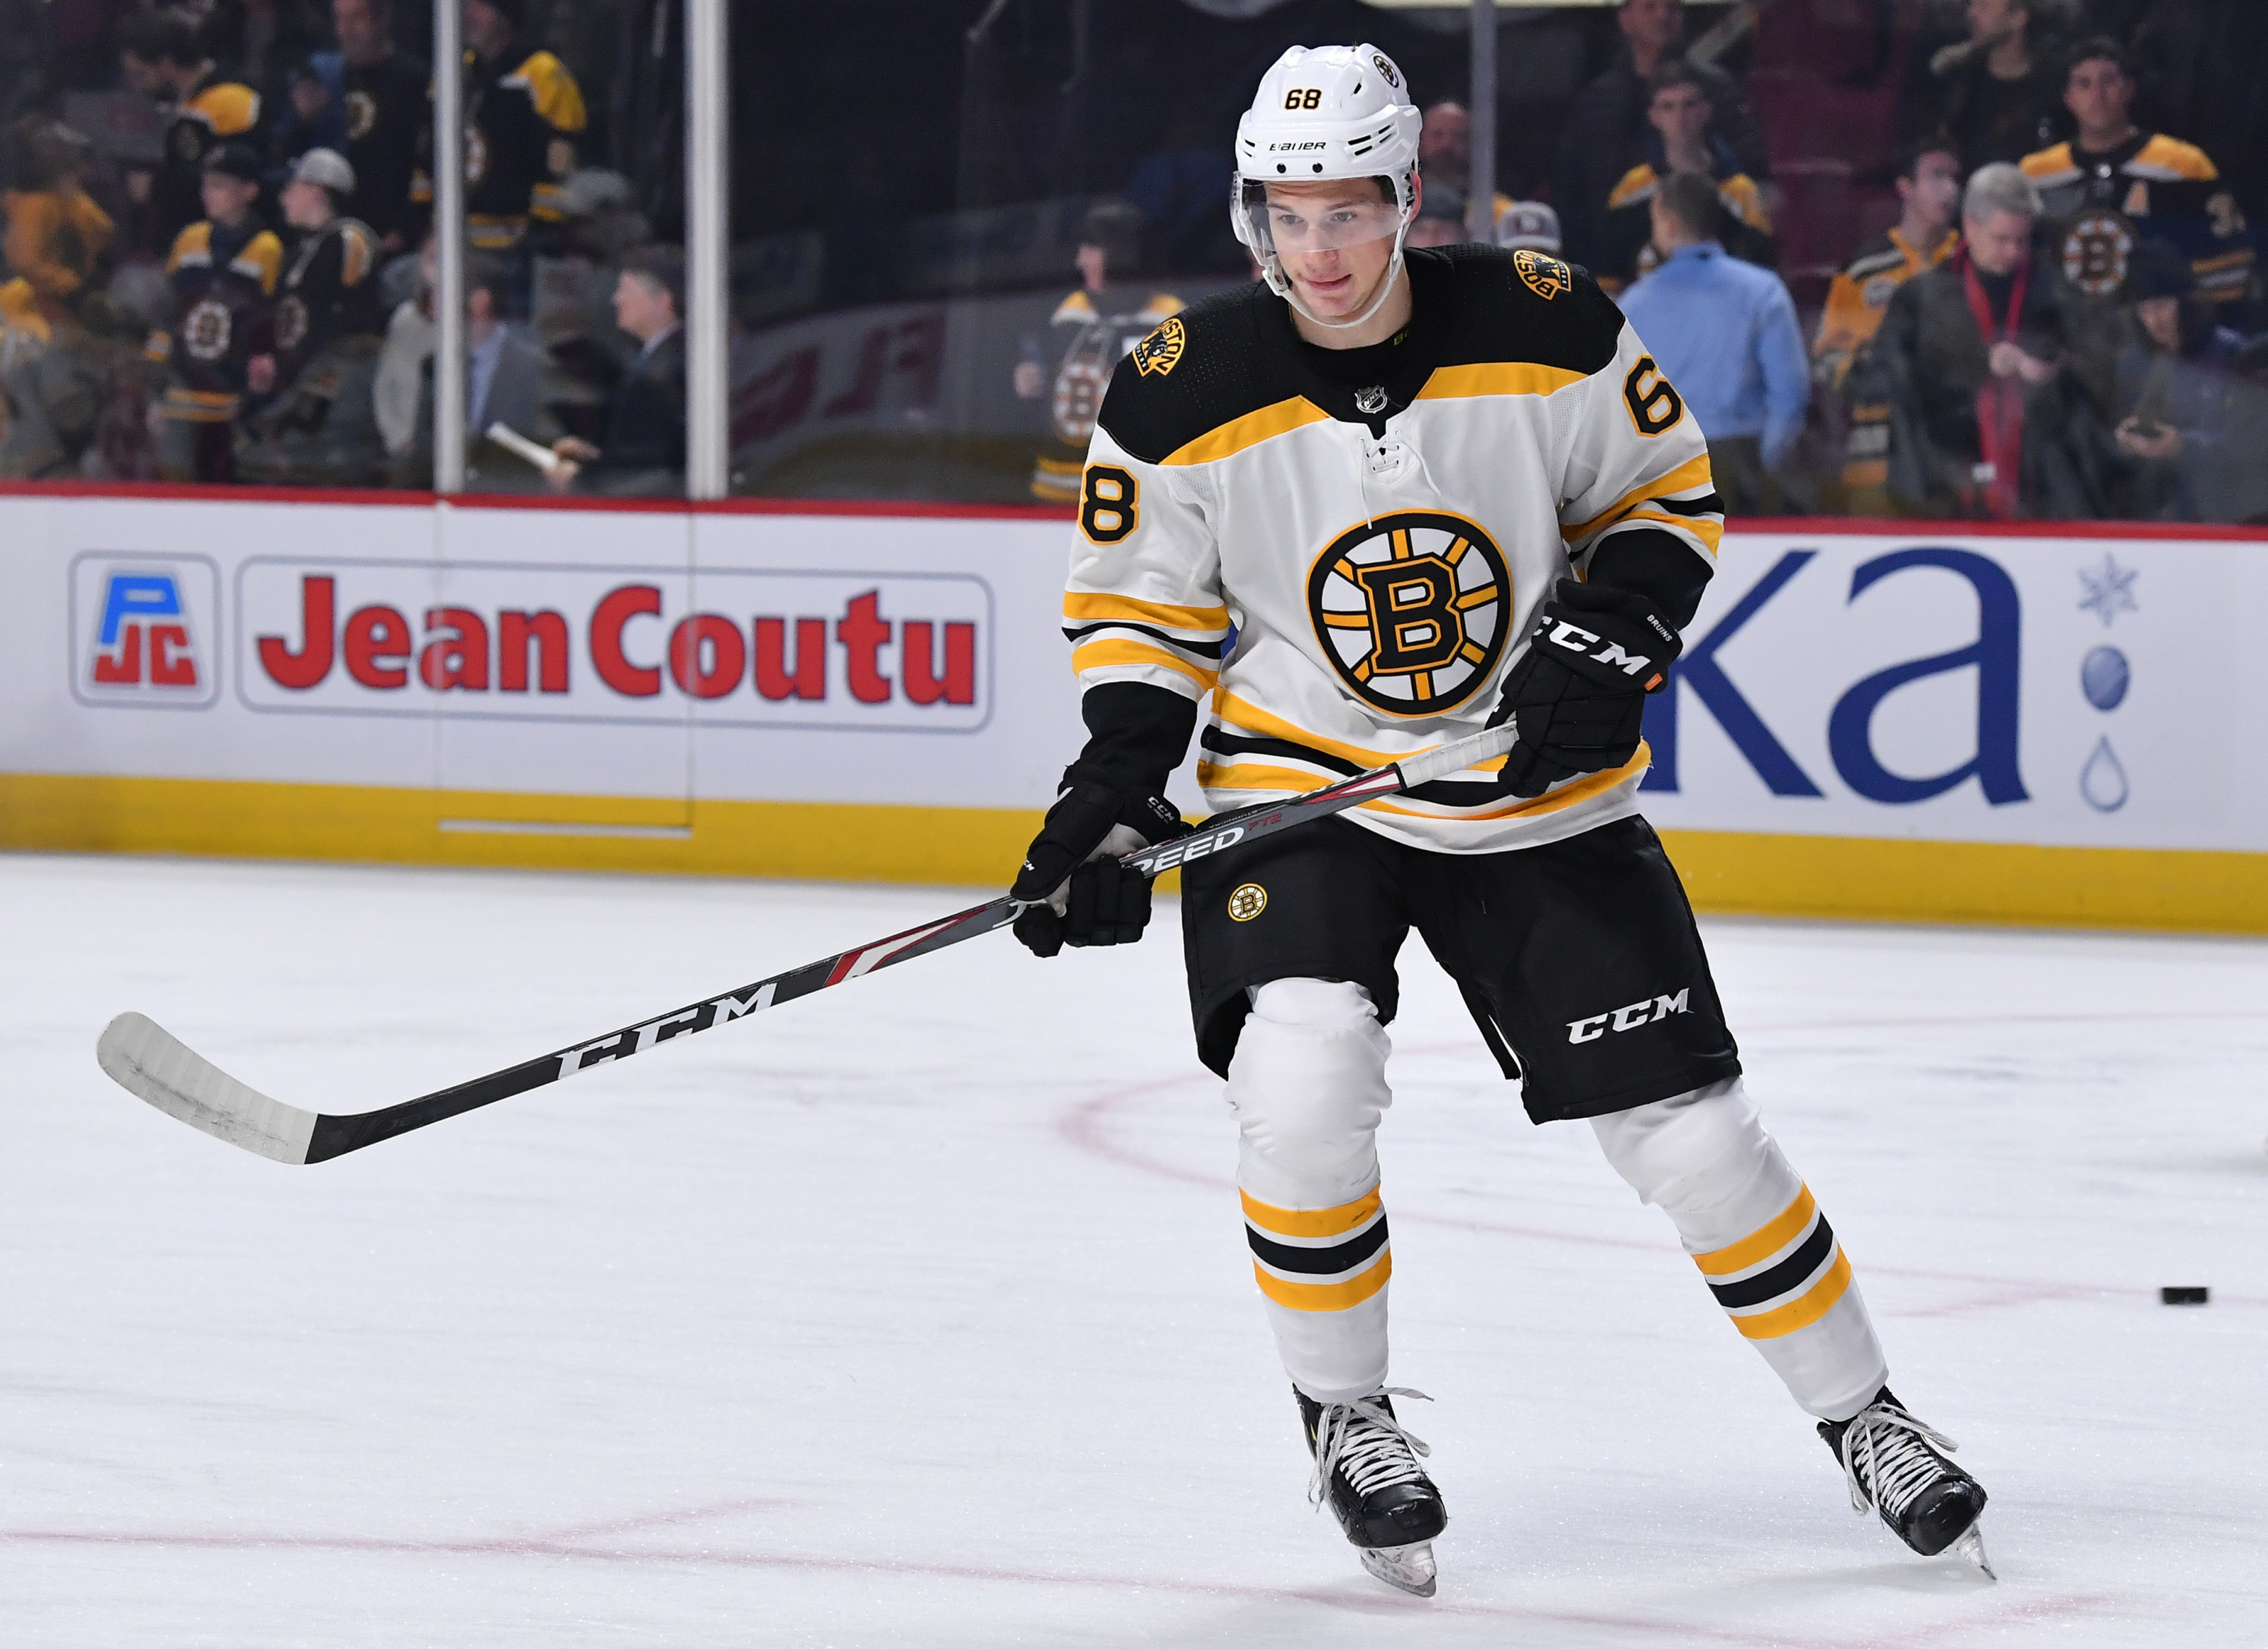 David Pastrnak of the Boston Bruins warms up prior to the 2019